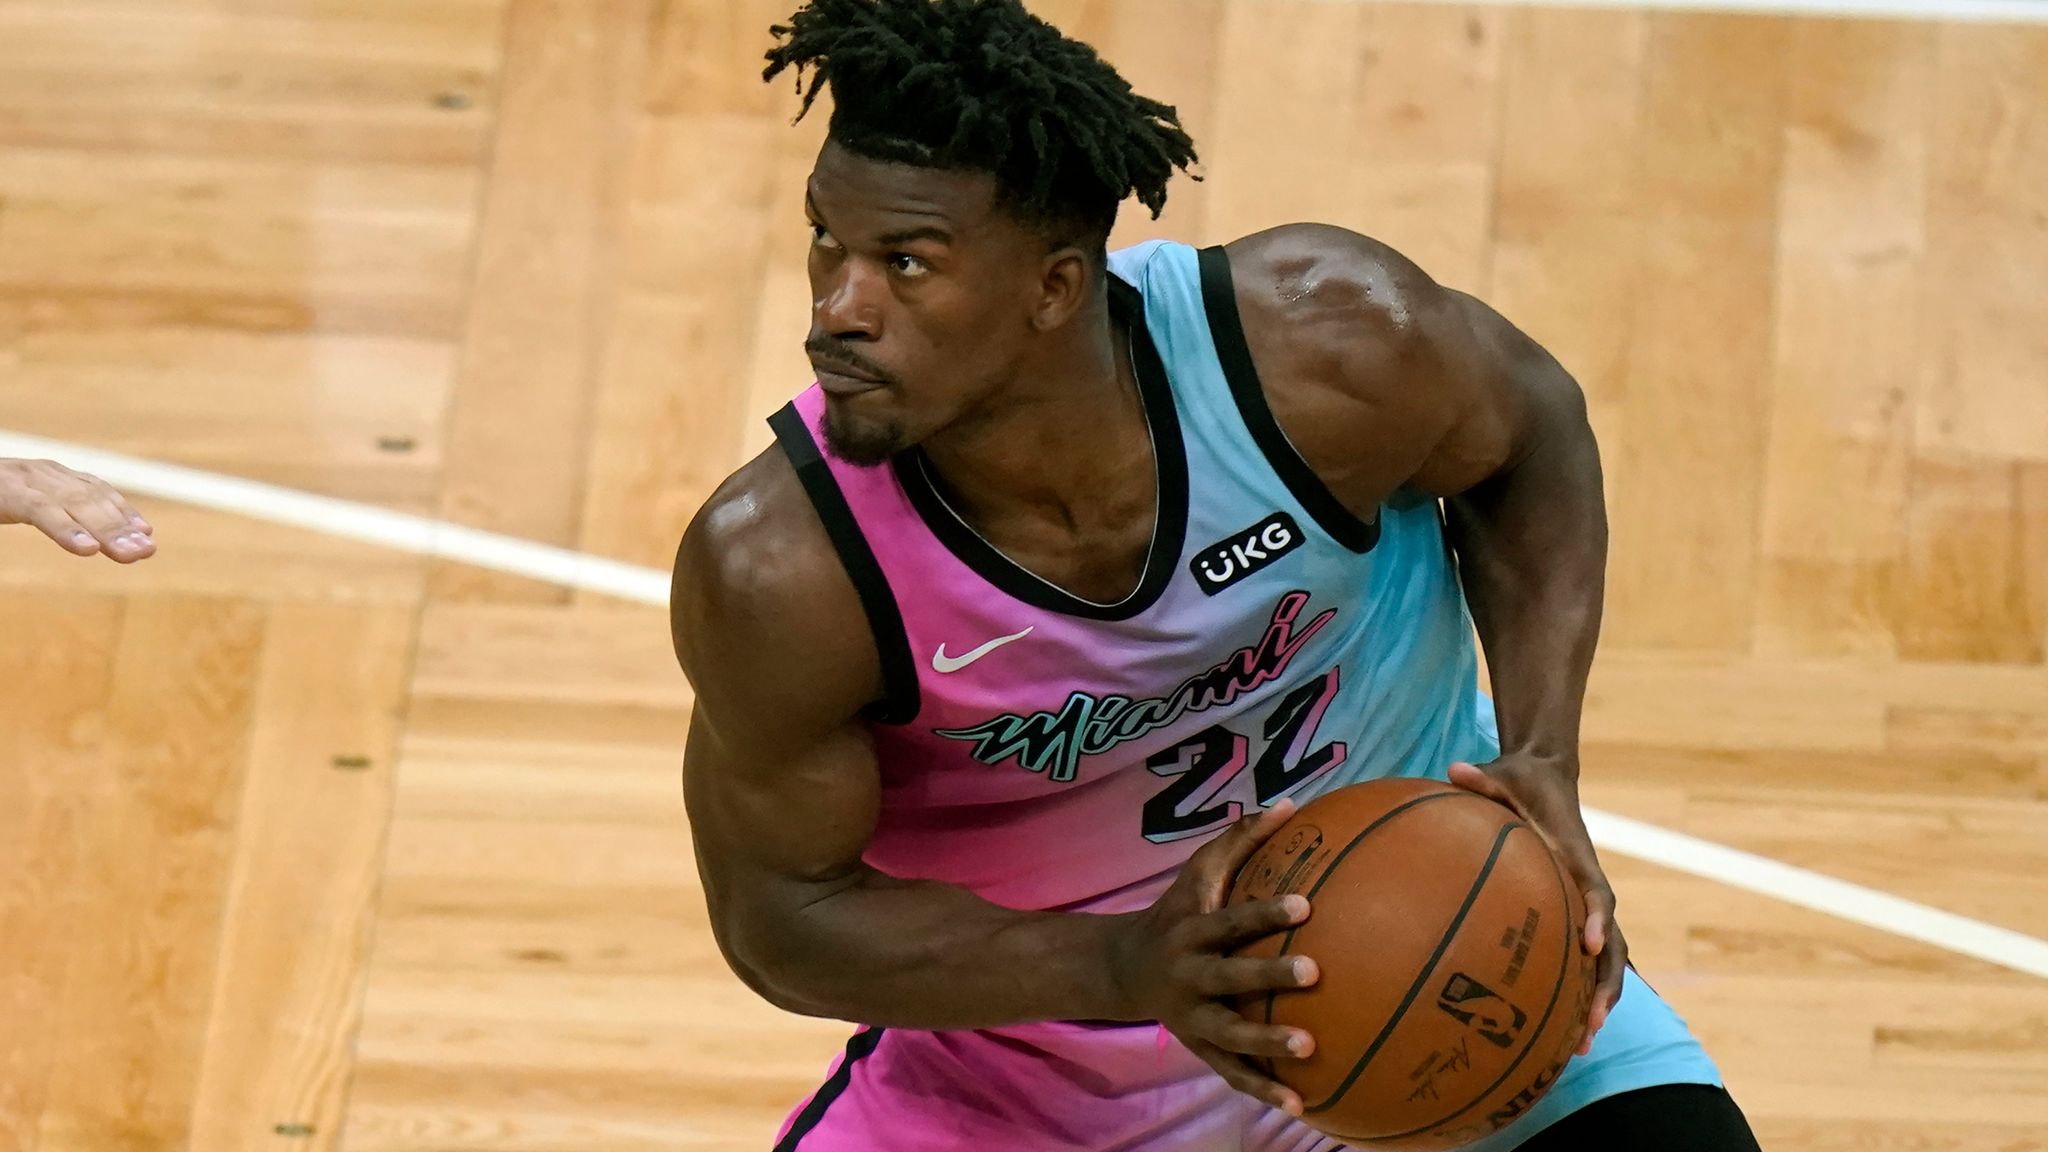 Miami Heat Schedule 2022 23 Jimmy Butler Signs New Four-Year, $184 Million Deal To Stay With Miami Heat  | Nba News | Sky Sports